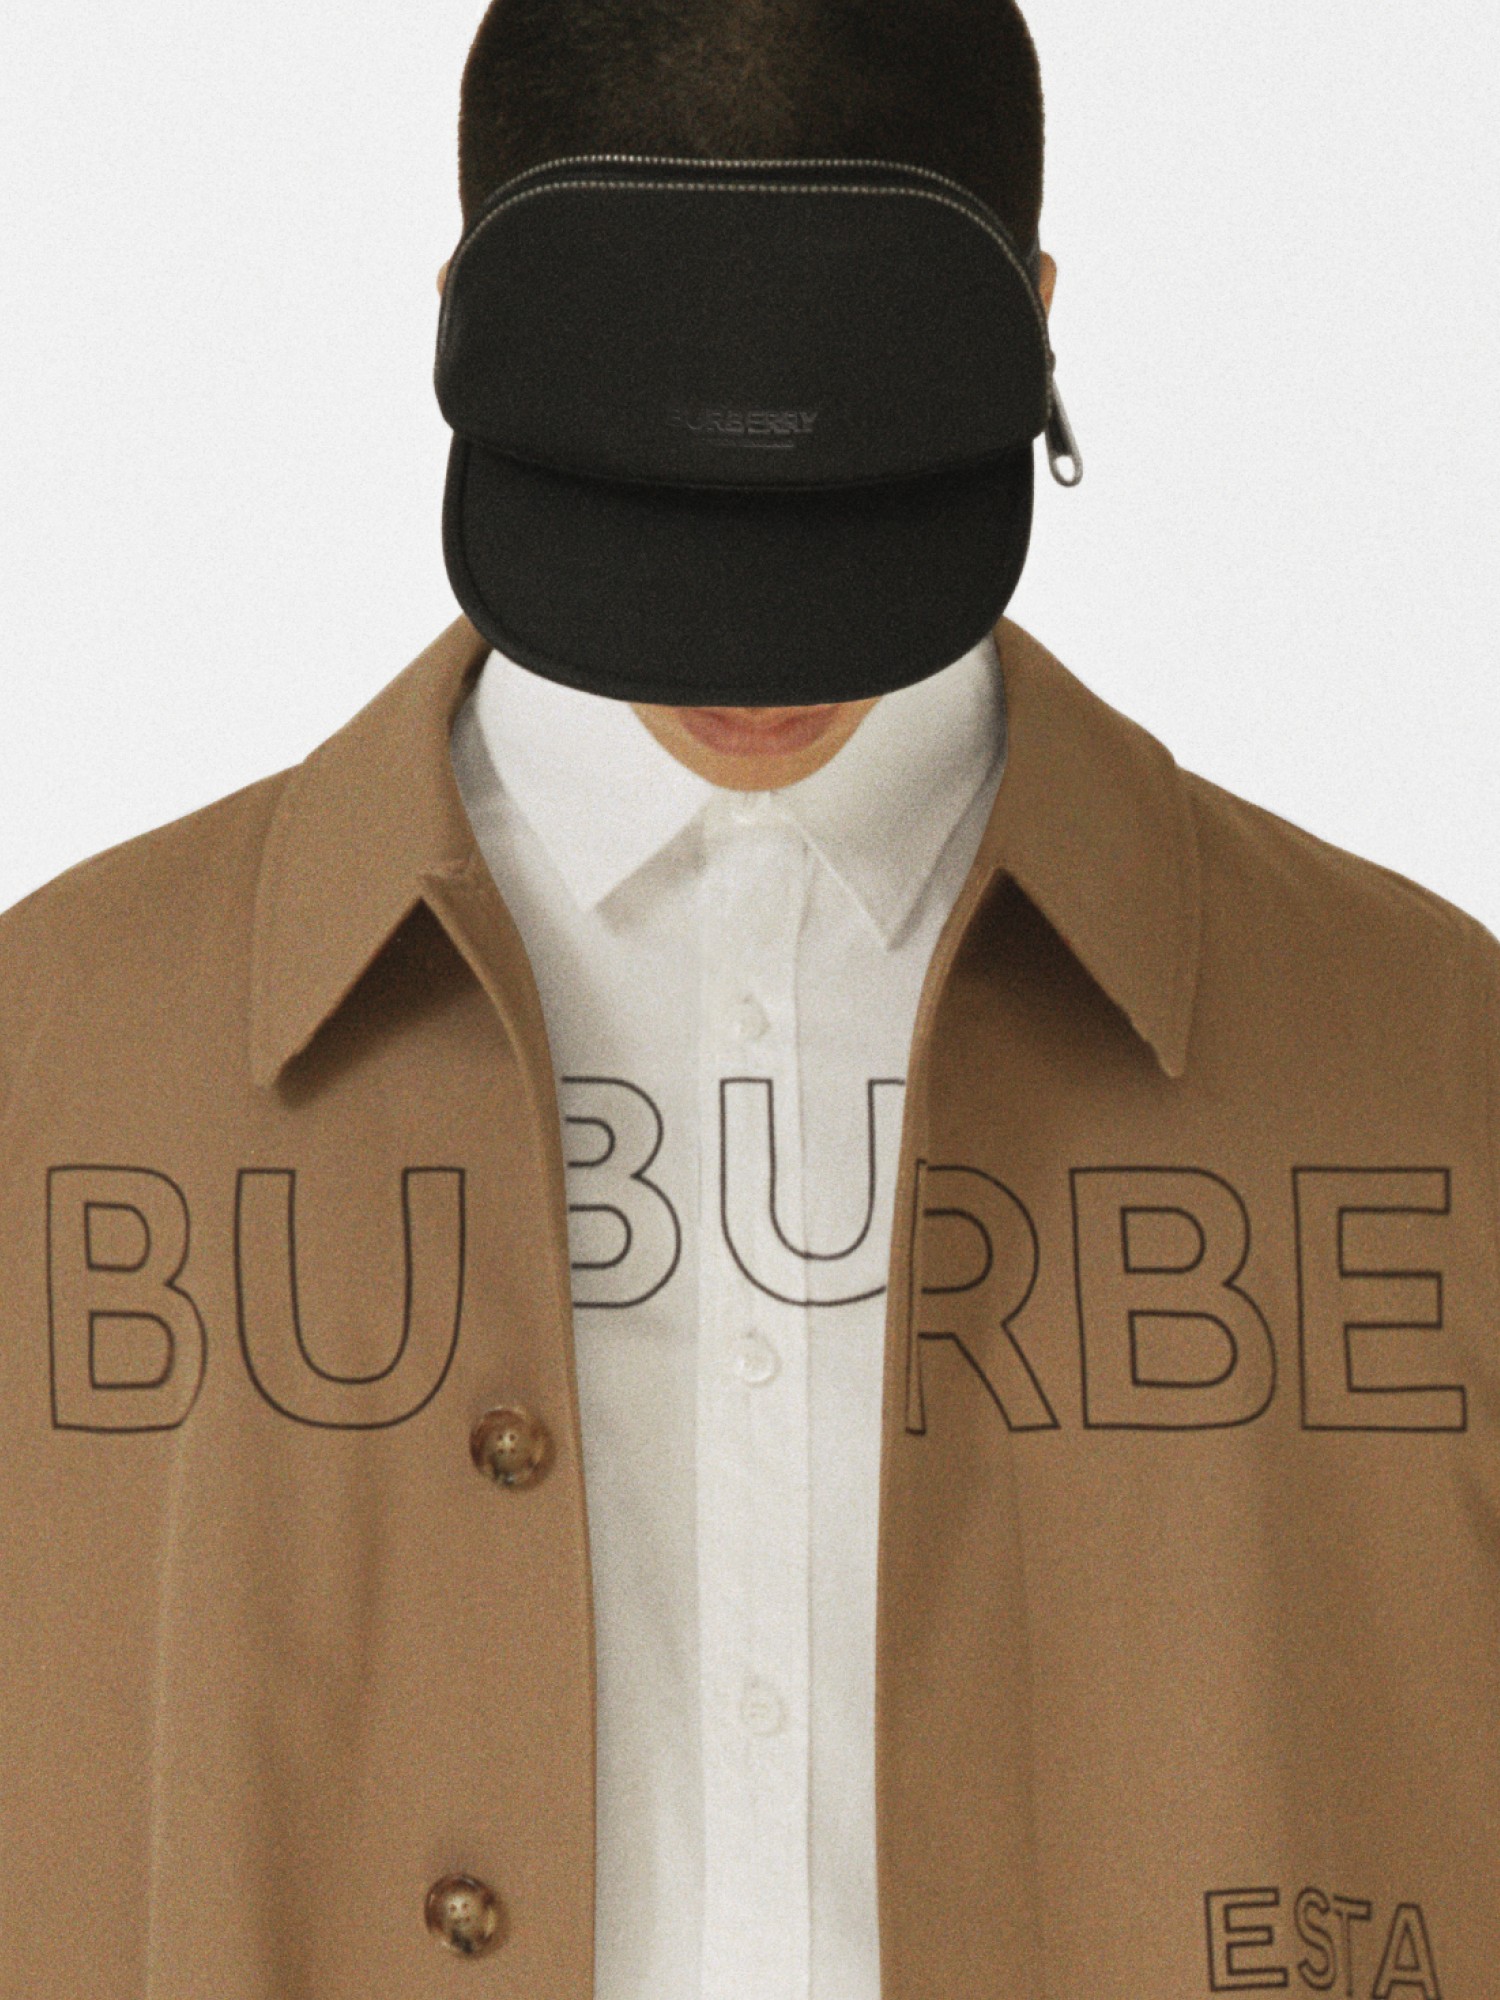 Join the World of Burberry | Burberry® Official